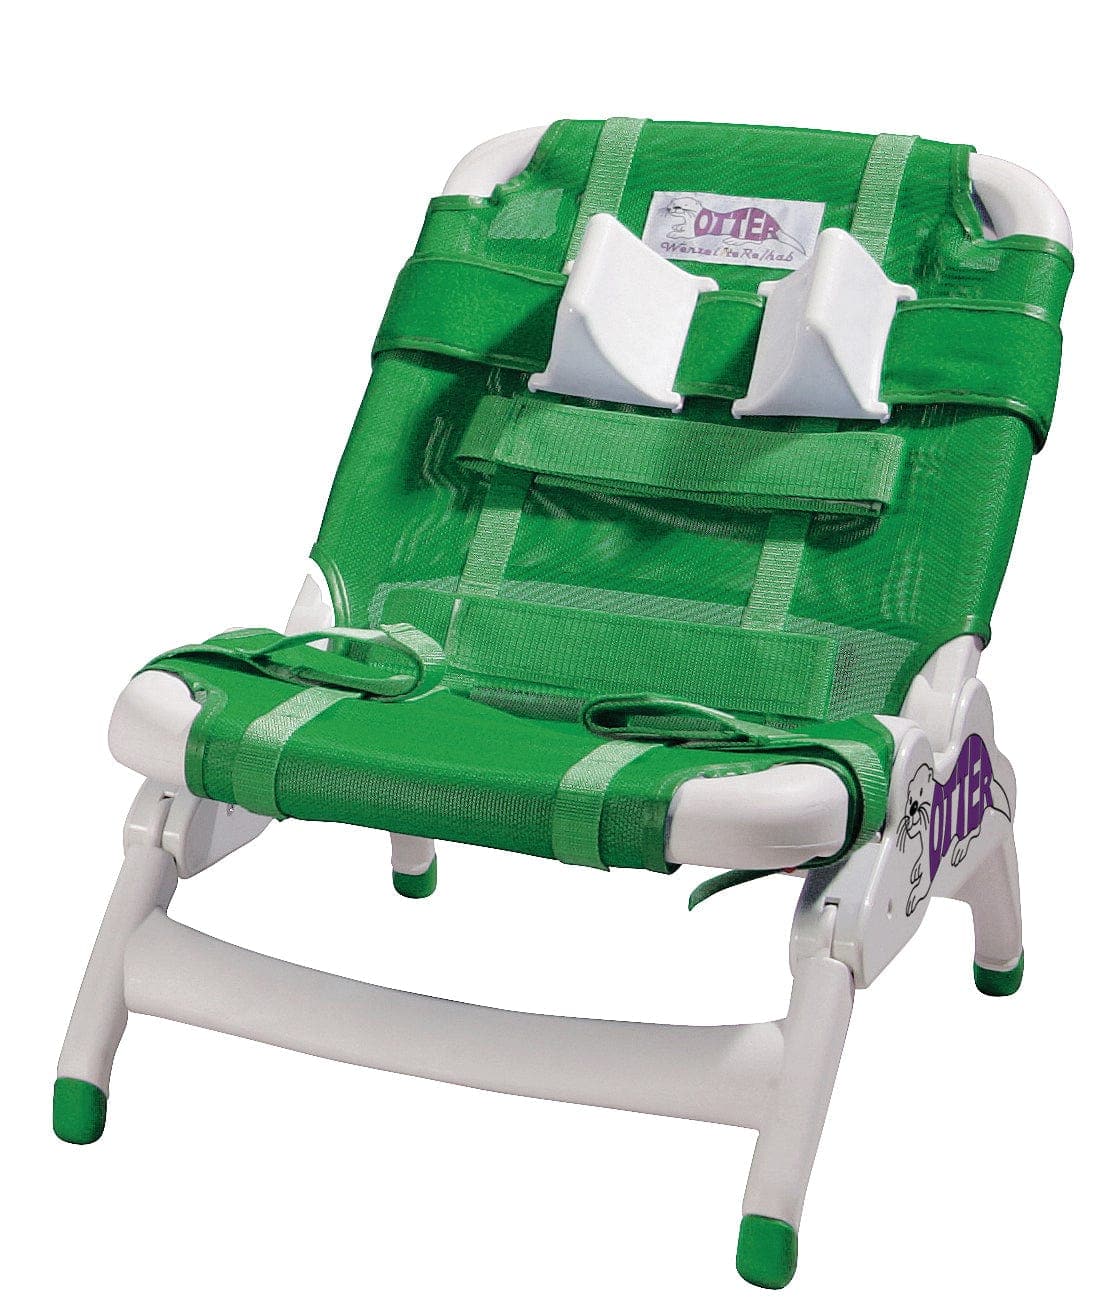 Drive Medical Pediatric Rehab With Tub Stand / Small Drive Medical Otter Pediatric Bathing System